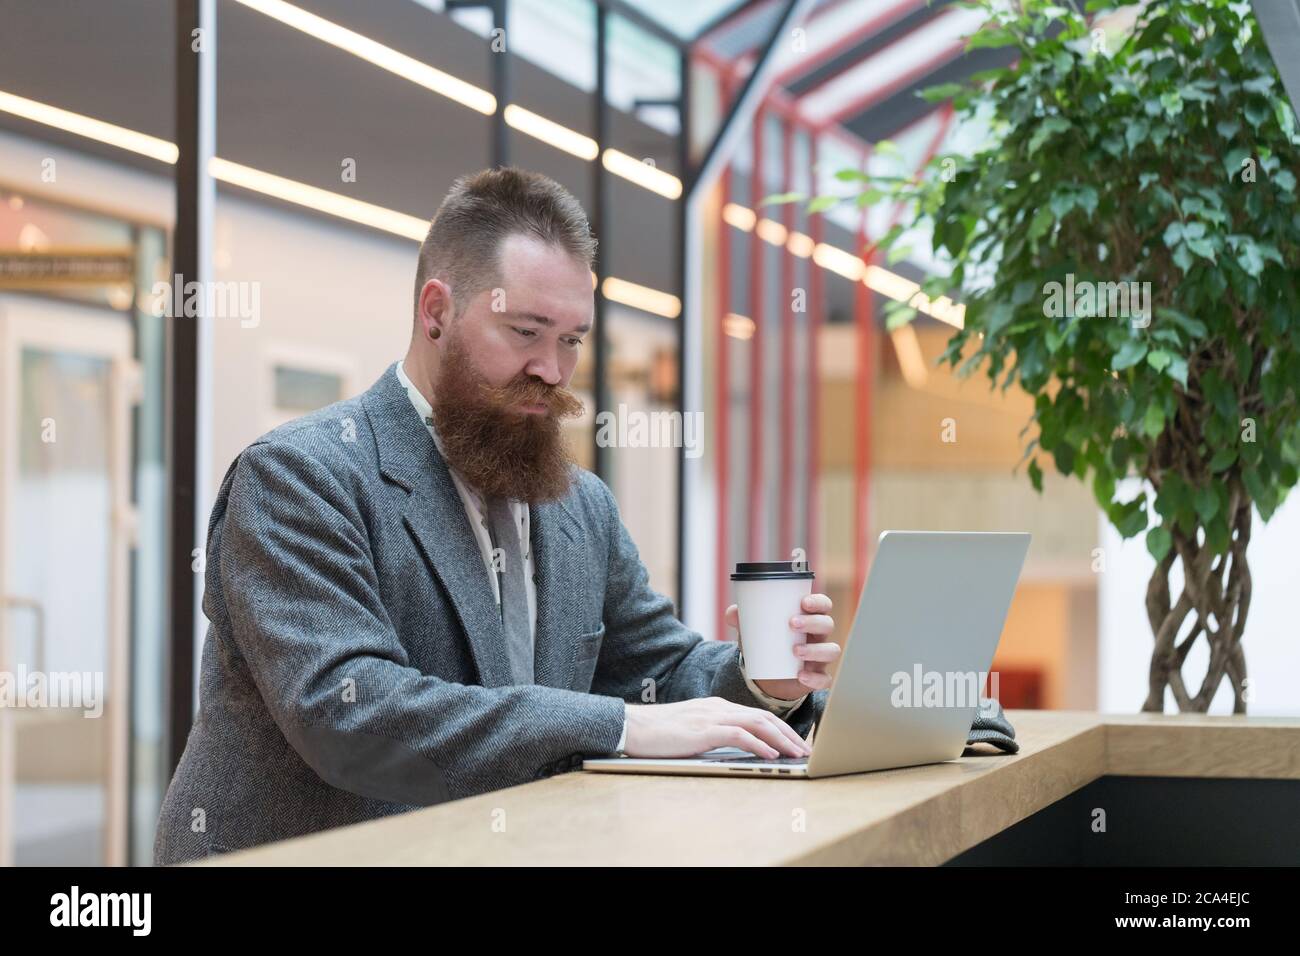 Portrait of brutal bearded hipster man wearing wool blazer working on laptop sitting in cafe/ restaurant, drinking coffee from a paper cup, indoor. Di Stock Photo